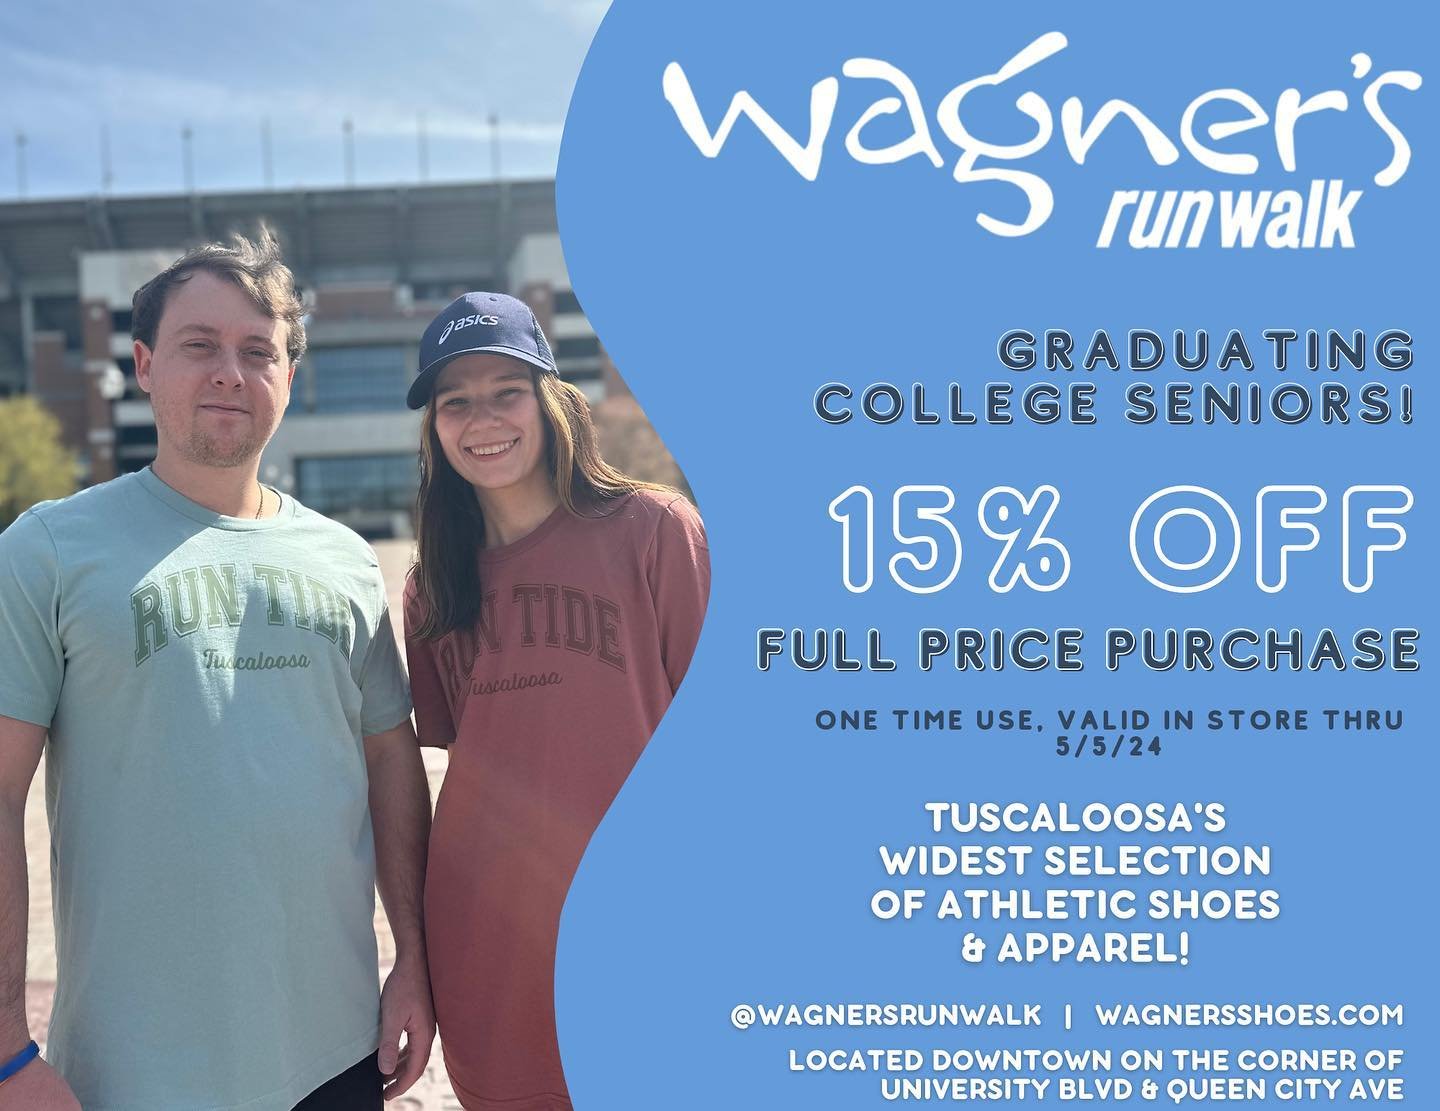 👨&zwj;🎓 ‼️ Graduating College Seniors!

🛍️ Redeem 15% off your full price purchase in store now through Sunday, 5/5!

📱 It&rsquo;a easy! Come in store and show this image and redeem!

Get the graduation present you REALLY want&mdash; your favorit